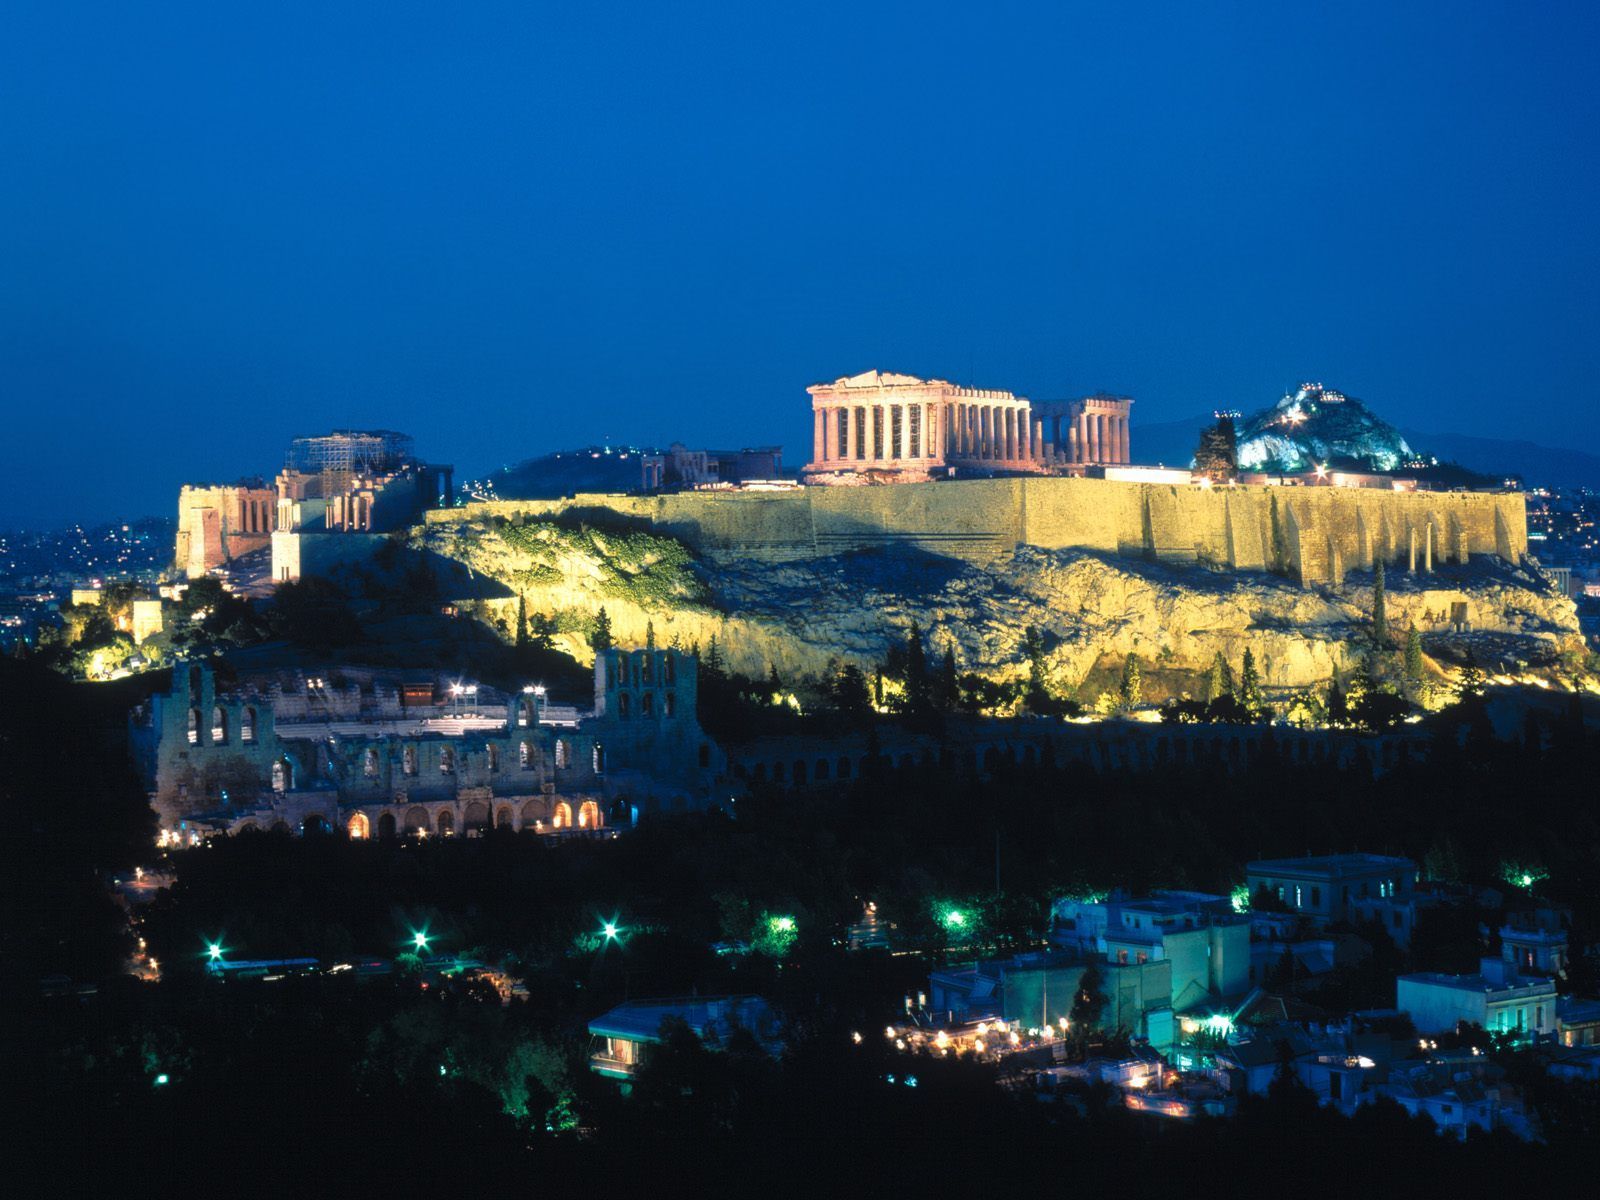 Acropolis Of athens Greece Wallpaper - Travel HD Wallpapers